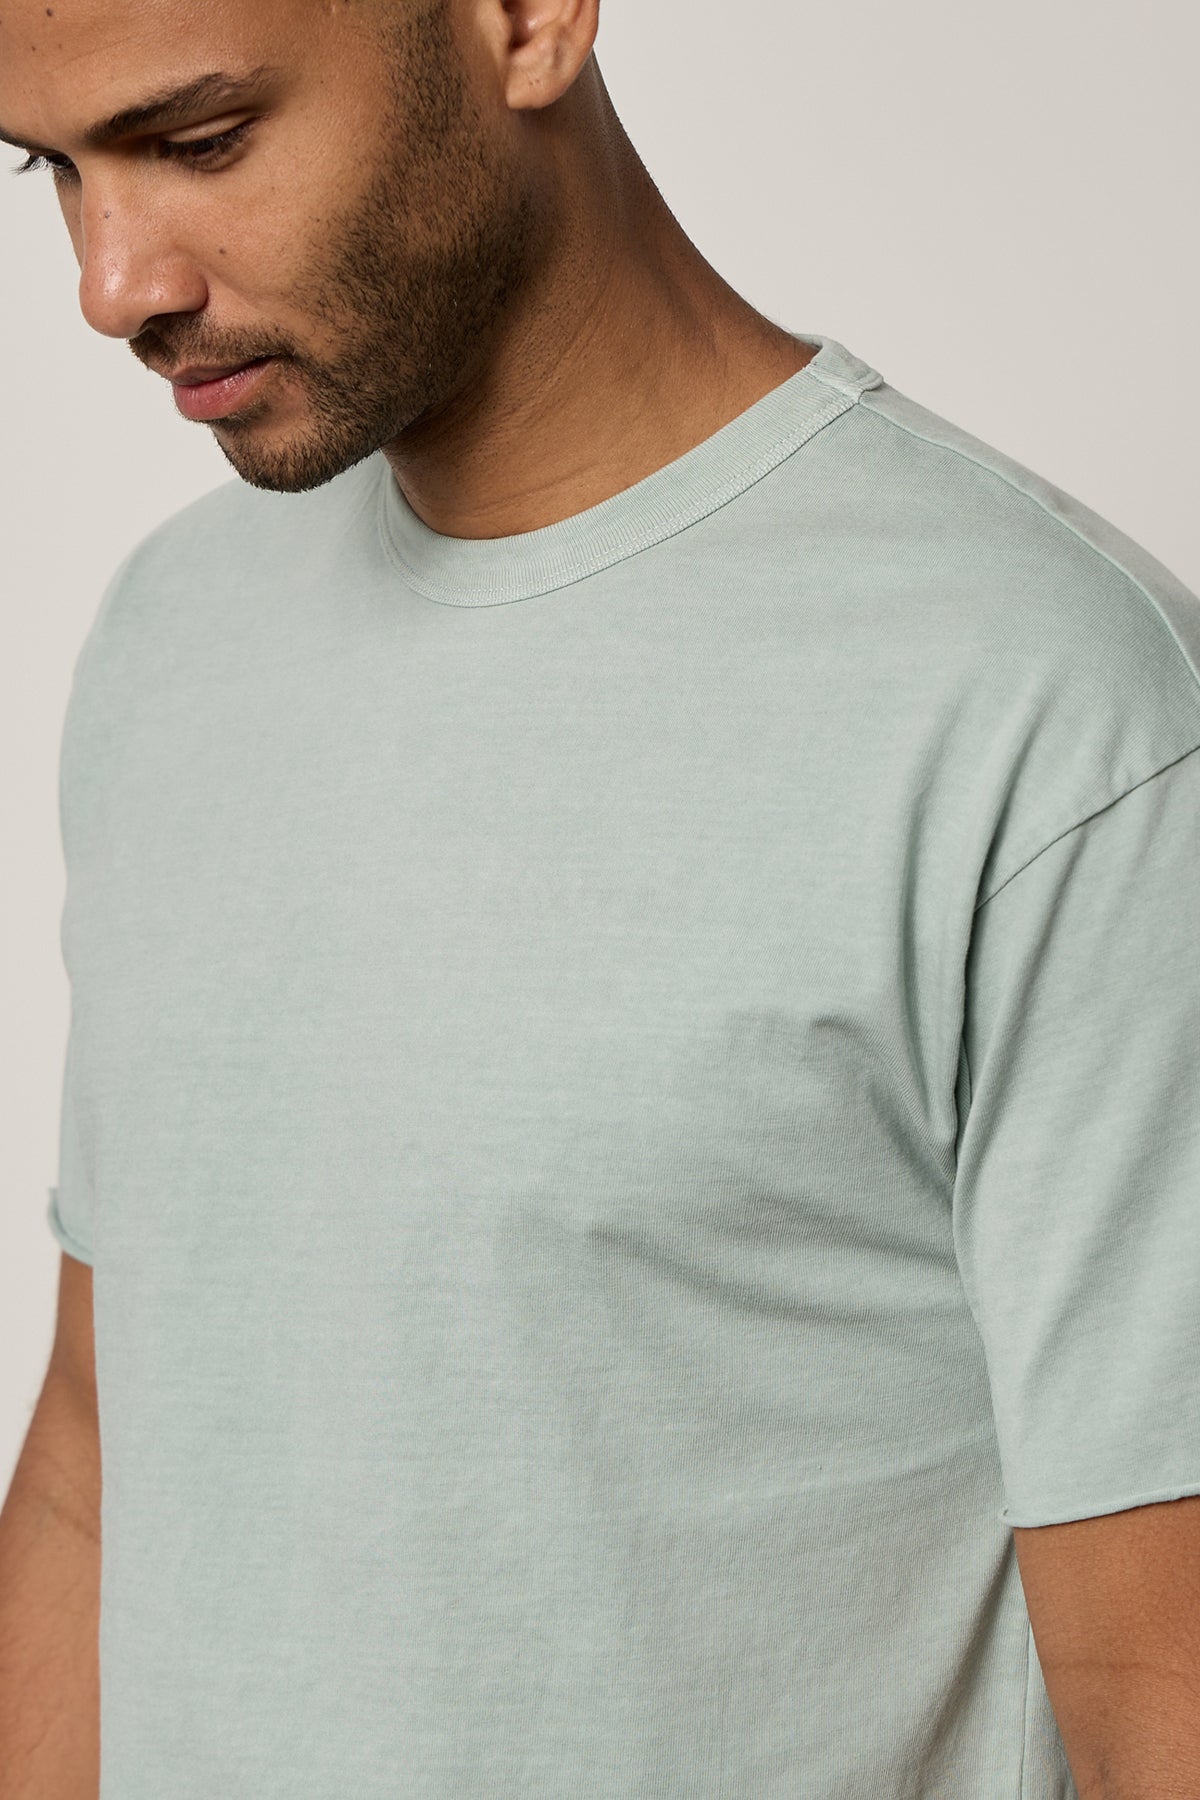 Man facing front wearing Beau Tee in mint green front detail showing raw-edge cuff-26468396105921